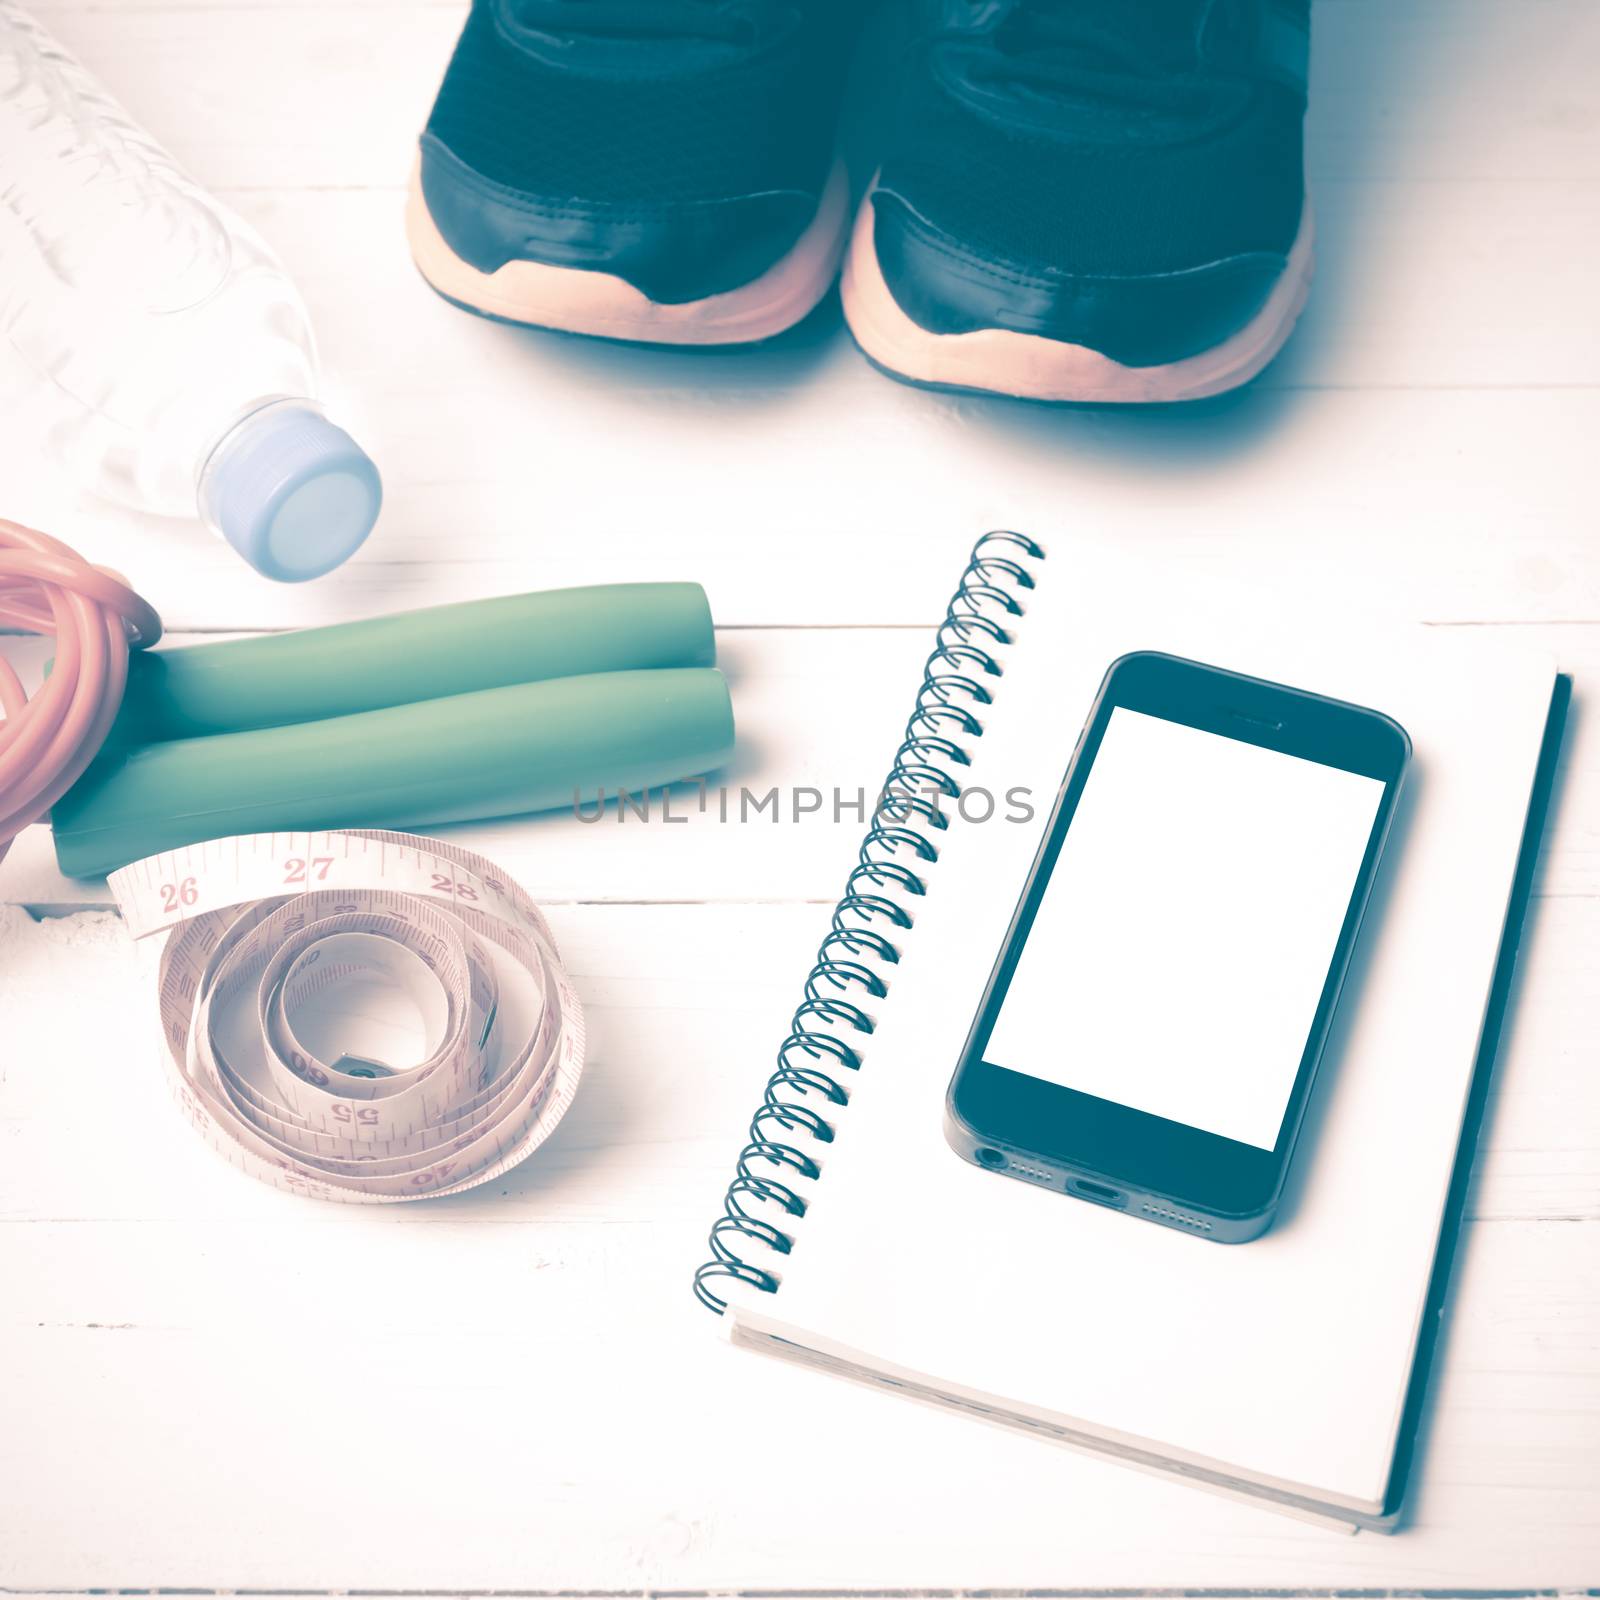 fitness equipment : running shoes,jumping rope,drinking water,notebook,measuring tape and phone on white wood table vintage style